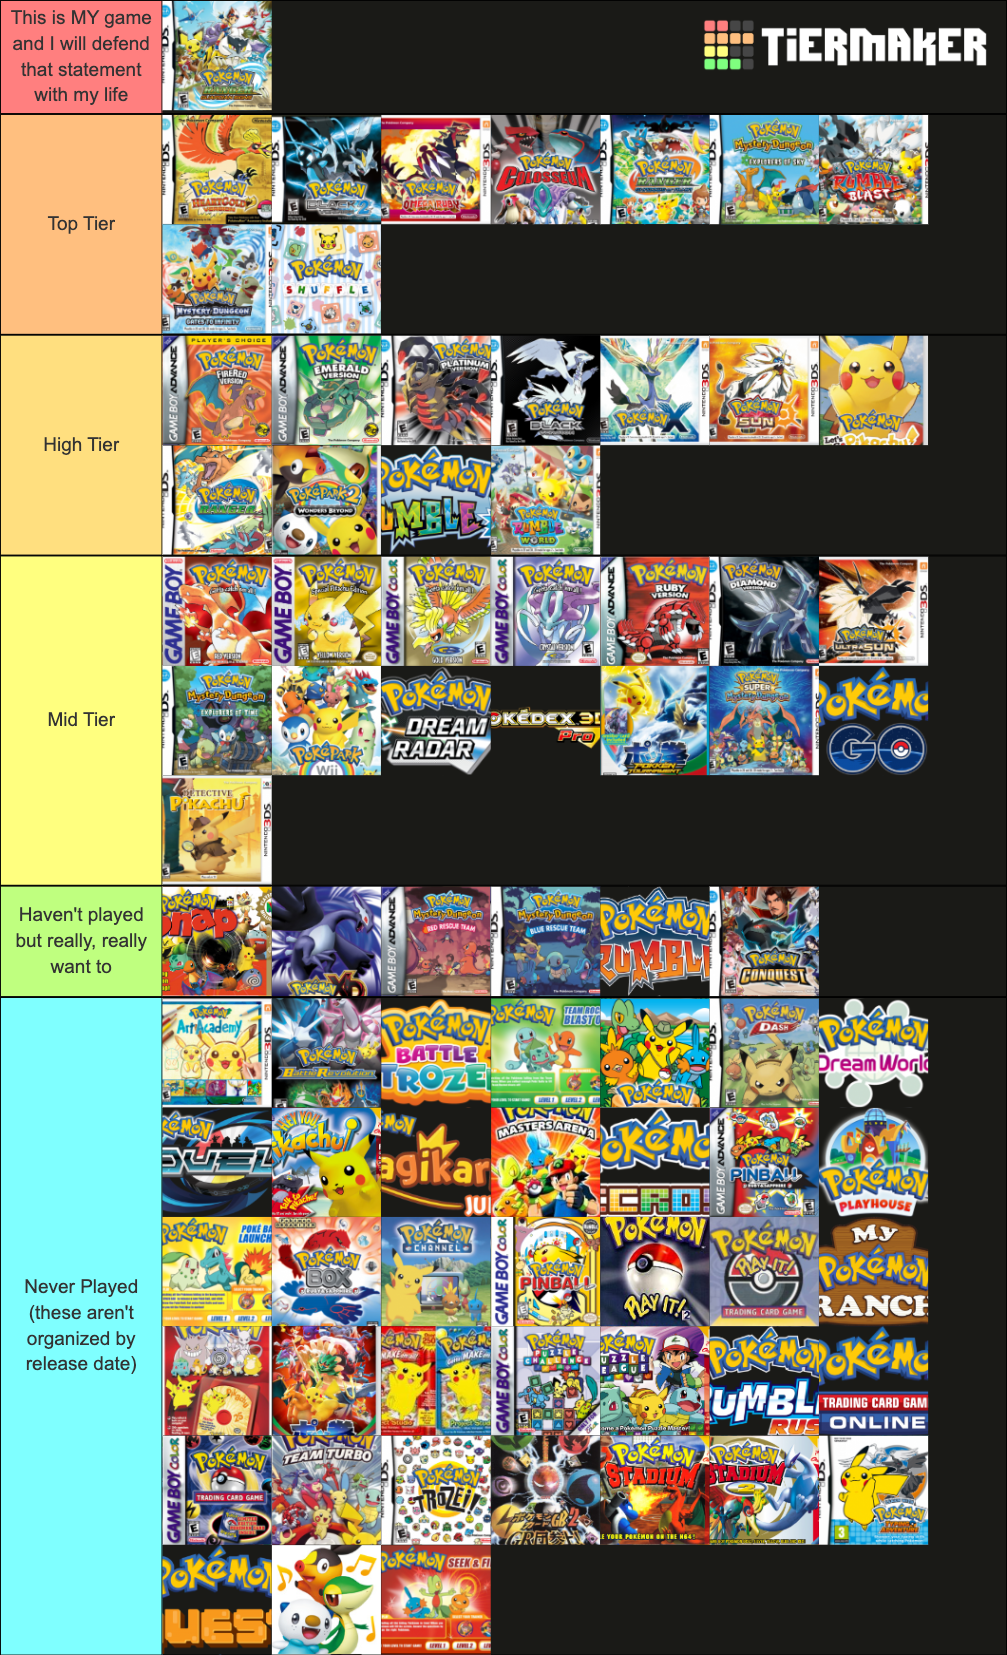 Your top 10 Pokémon games and why